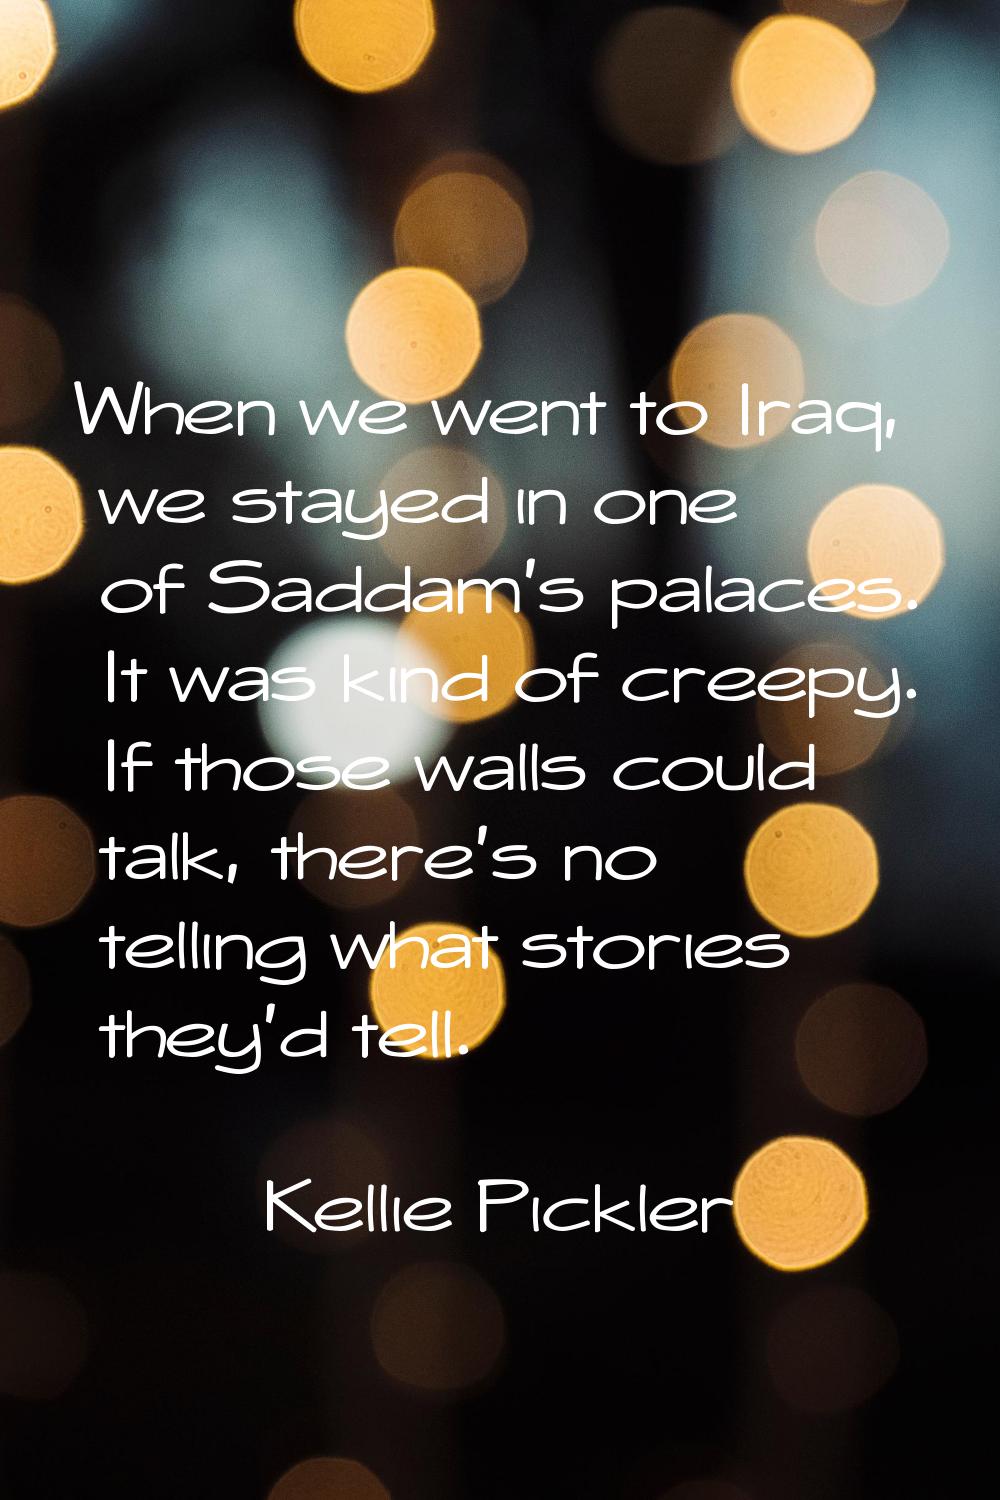 When we went to Iraq, we stayed in one of Saddam's palaces. It was kind of creepy. If those walls c